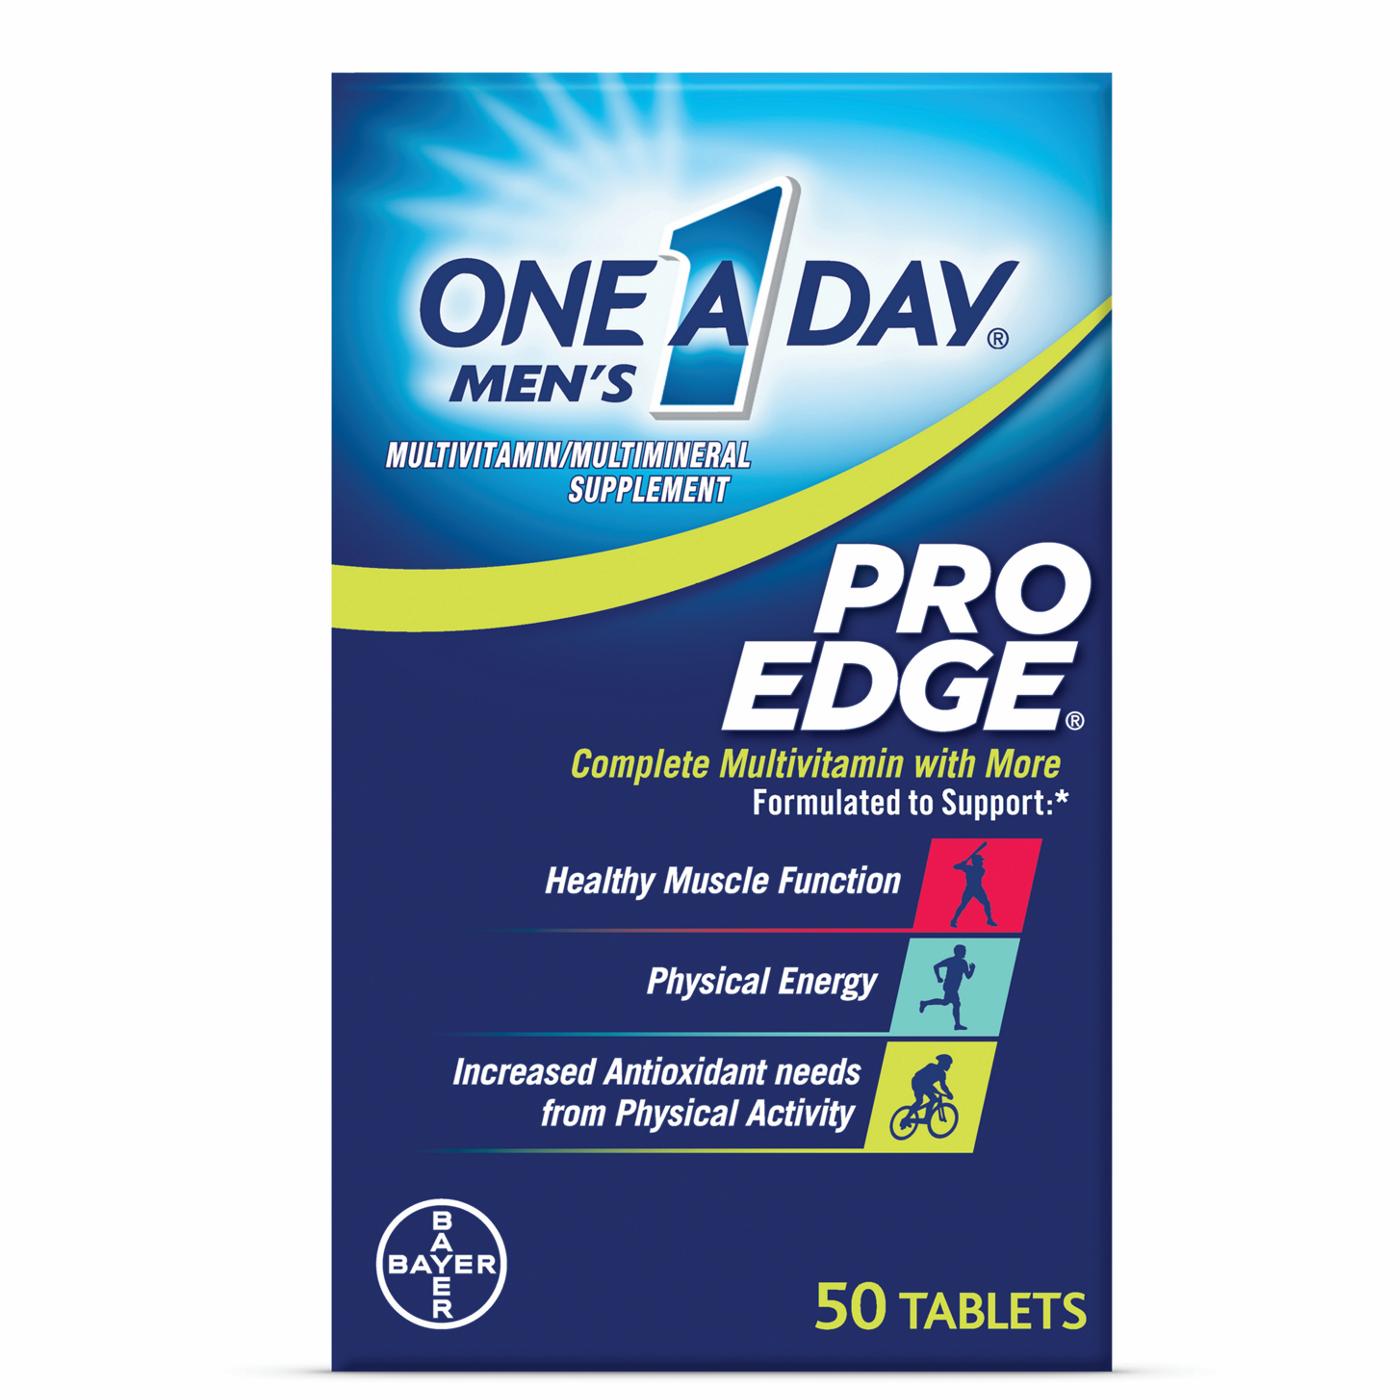 One A Day Men's Pro Edge Multivitamin Tablets; image 1 of 8